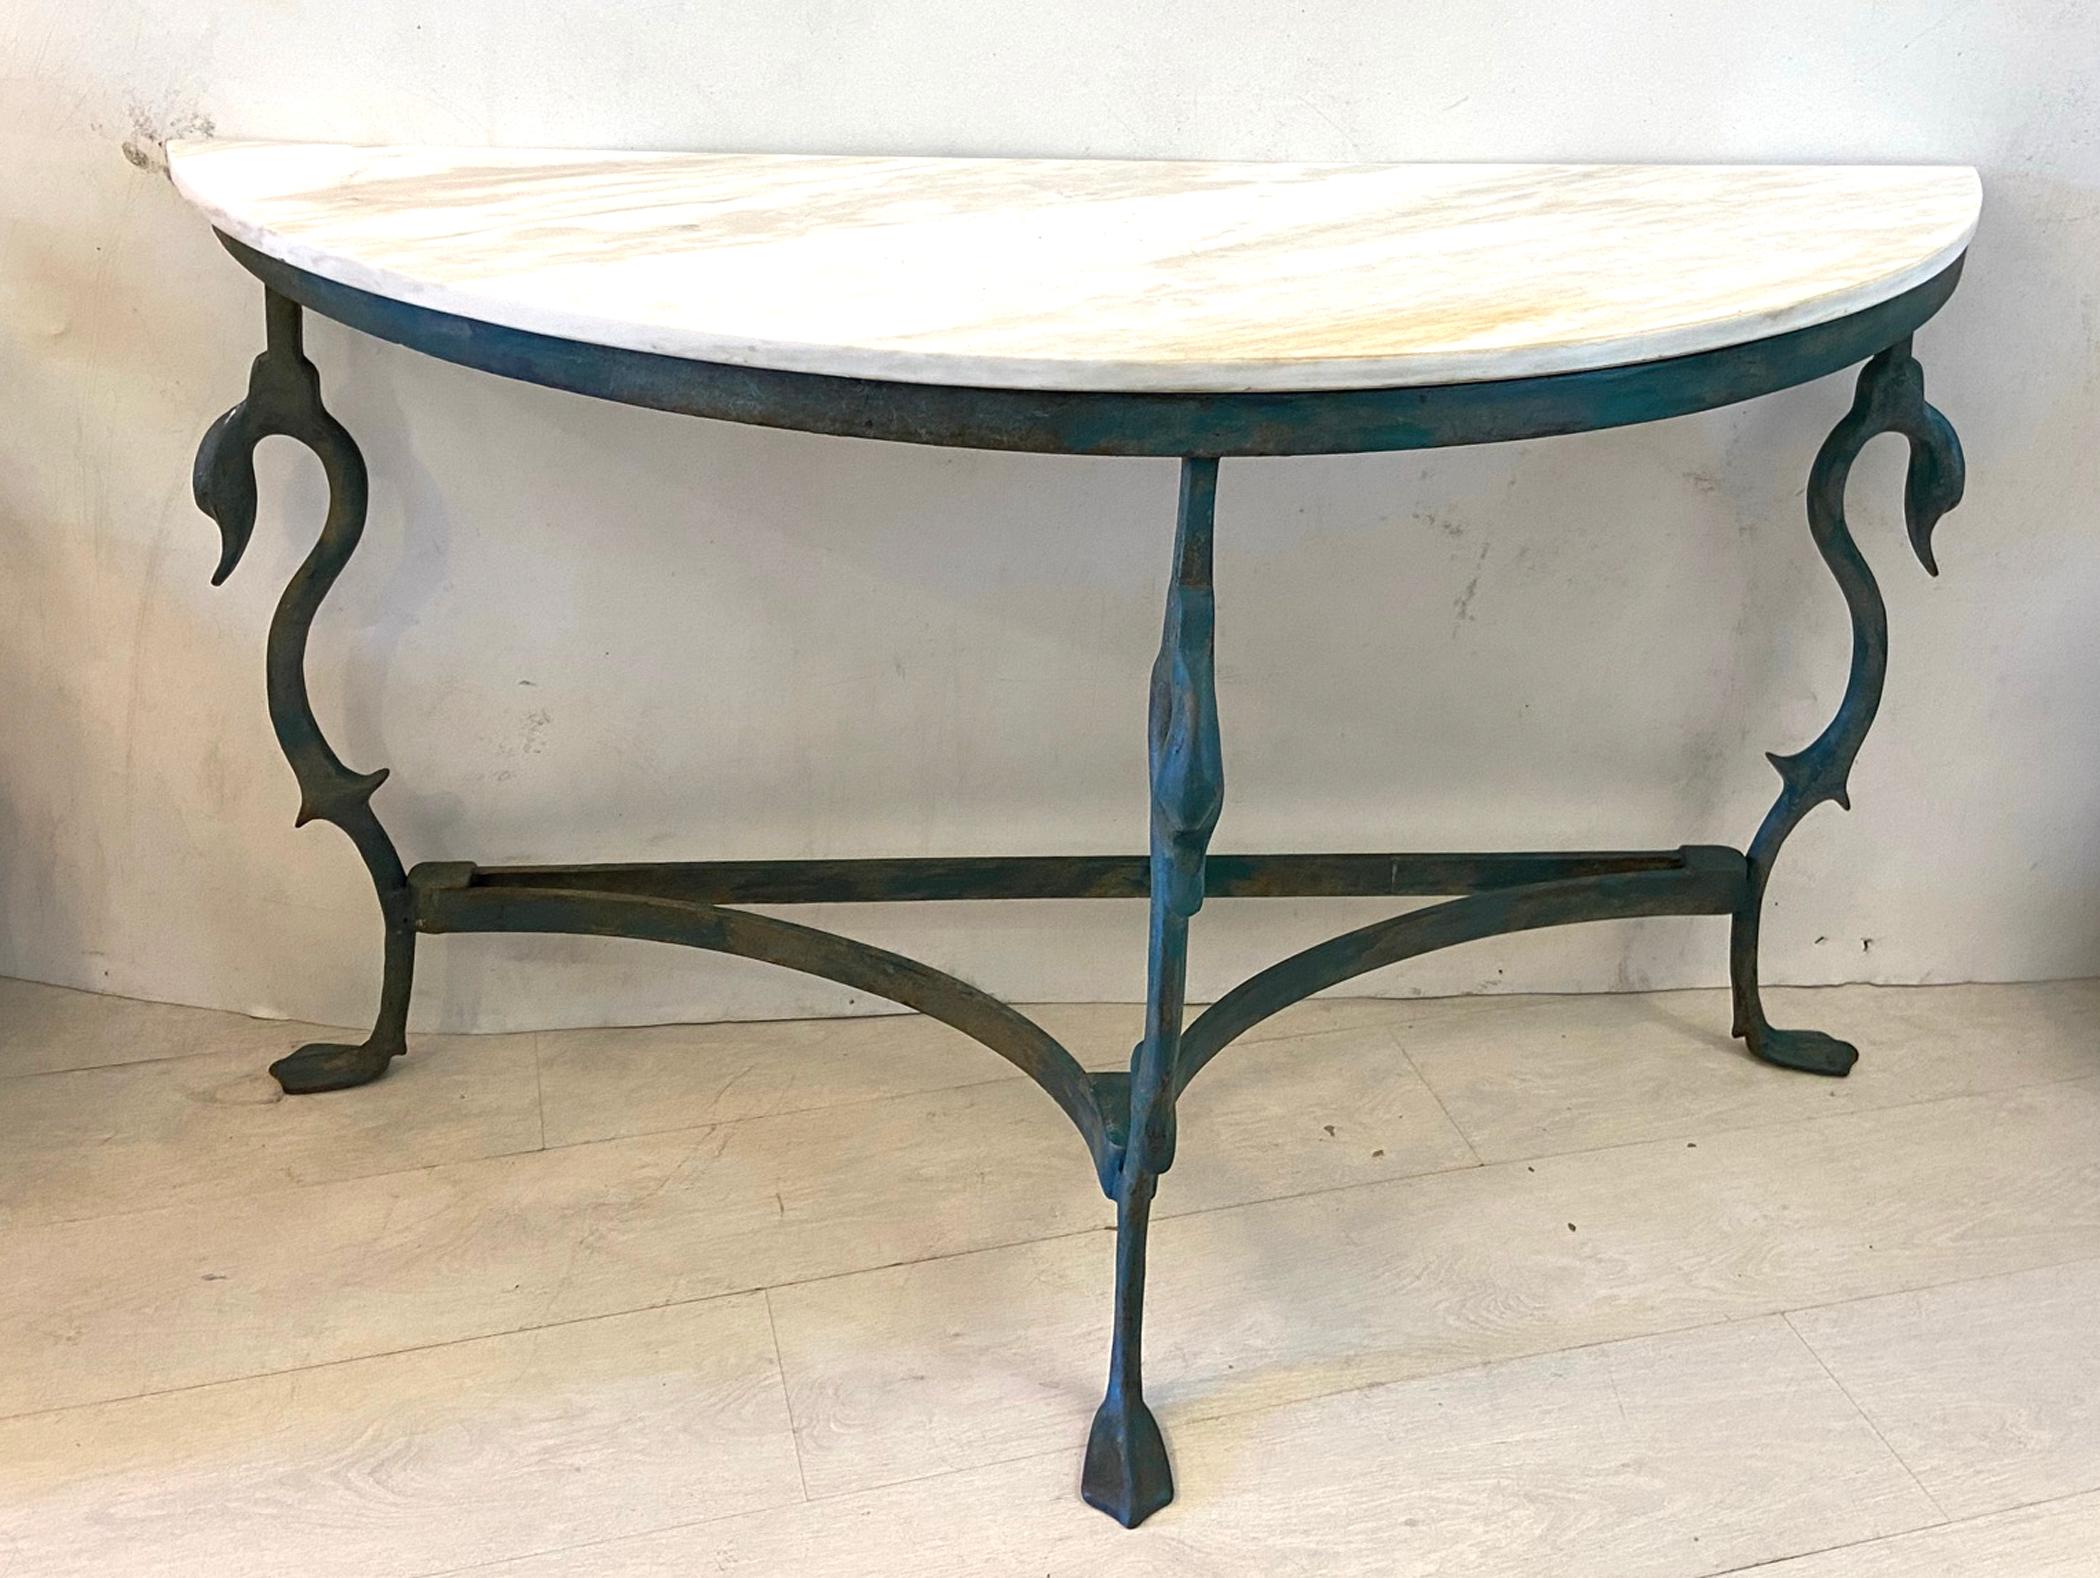 French midcentury wrought and cast iron with marble top demilune swan table. Three leg table each with a swan and webbed foot. Greenish bronze colored finish. 51 inches wide by 19 deep by 30 high.